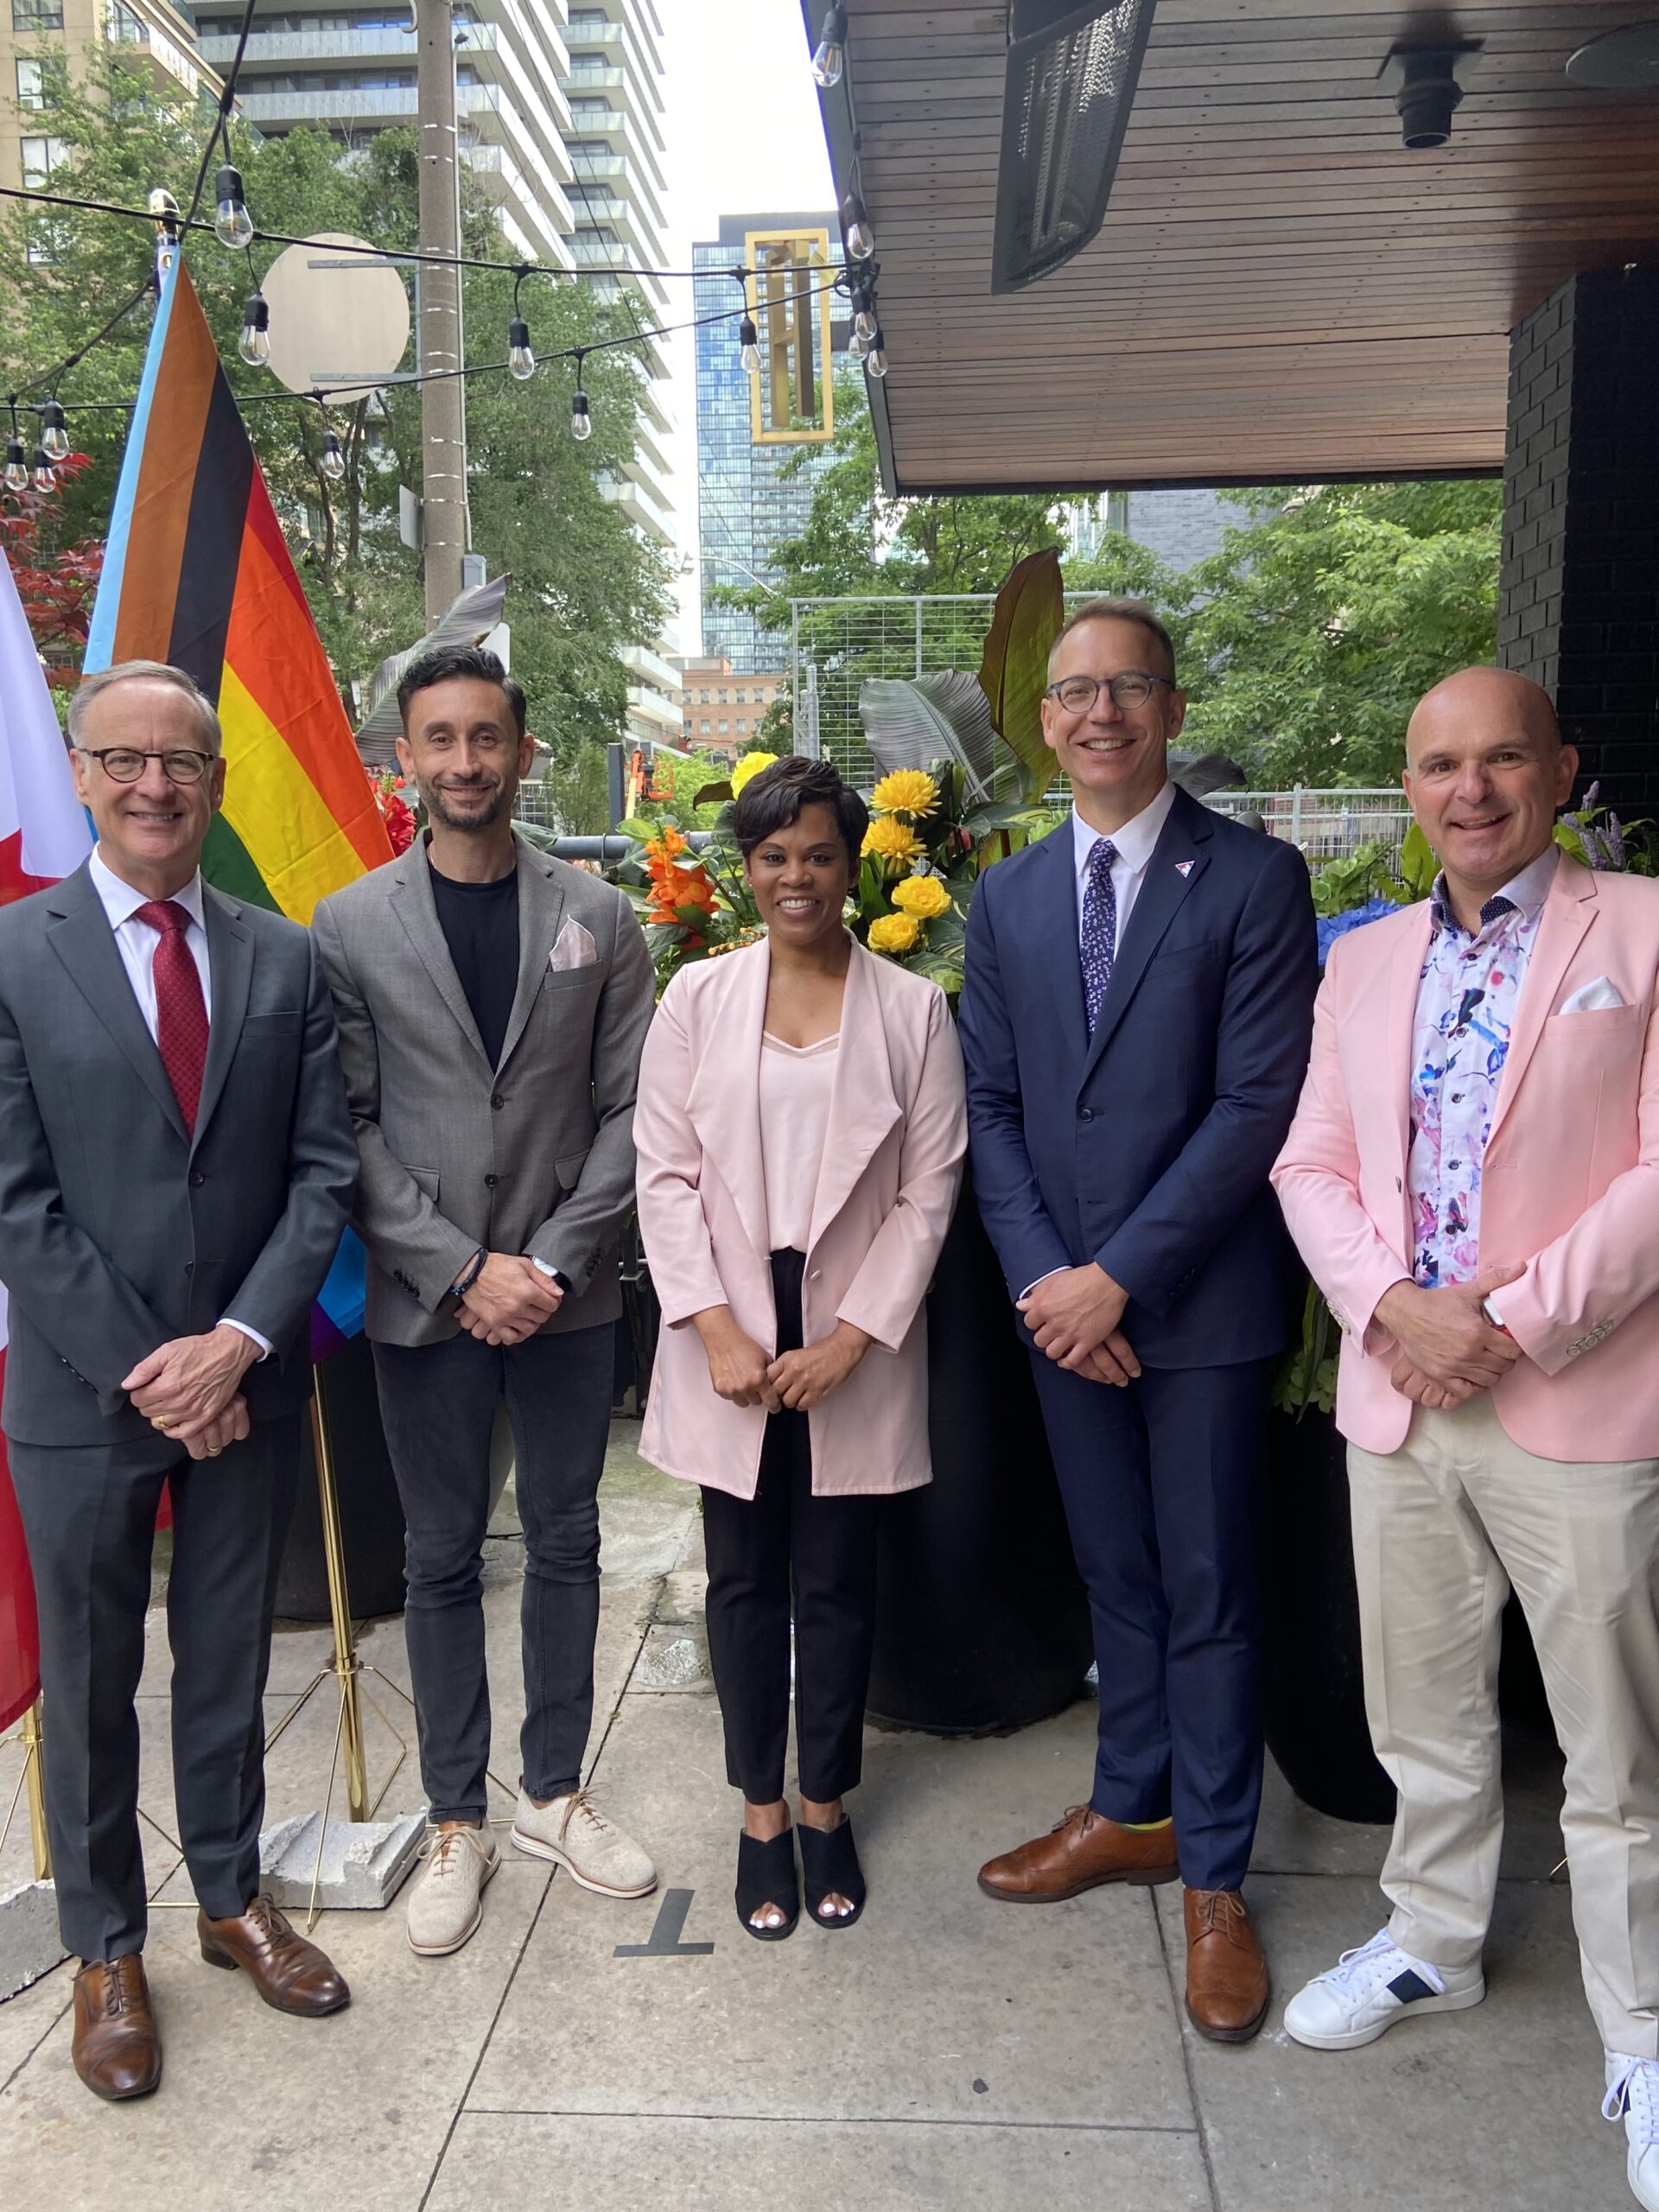 (L to R): The Honourable Rob Oliphant, MP Don Valley West, General Manager of The Anndore House (a Rainbow Registered accredited hotel), George Sovatzis, the Honourable Marci Ien, Minister for Women and Gender Equality of Canada, Darrell Schuurman, CEO and co-founder, Canada's 2SLGBTQI+ Chamber of Commerce, and Randy Boissonnault, Minister of Tourism and Associate Minister of Finance.